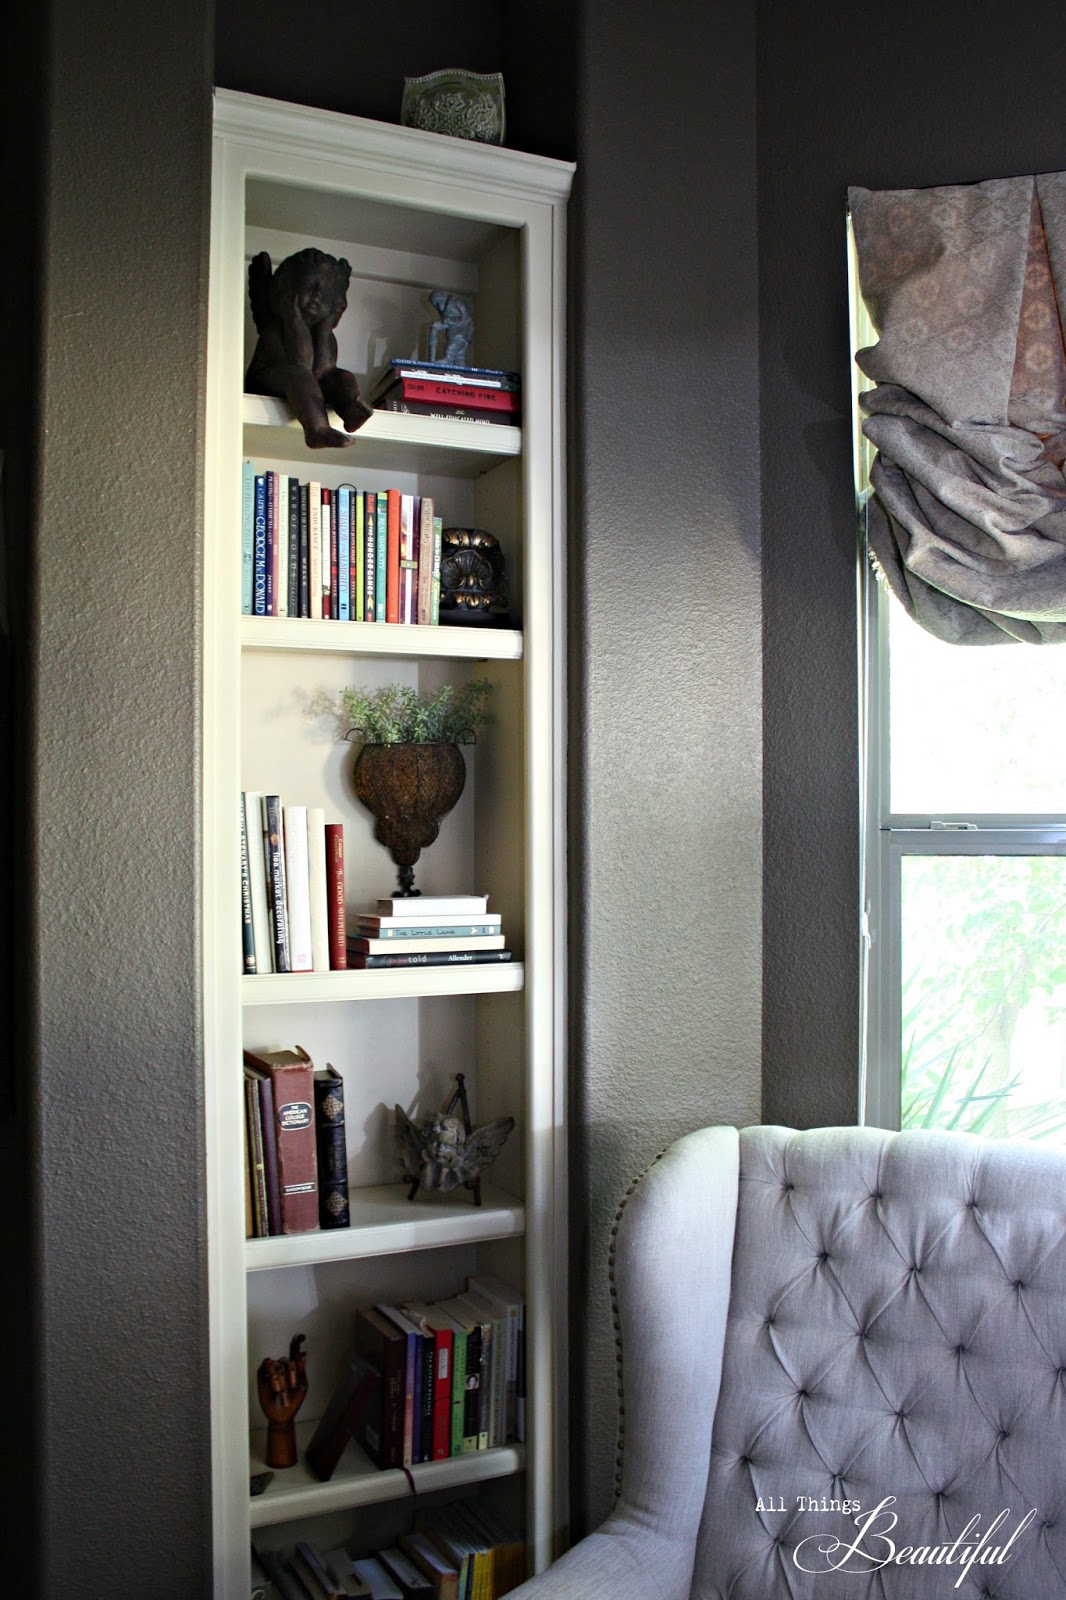 Styling Bookshelves: From Cluttered To Curated In Simple Steps